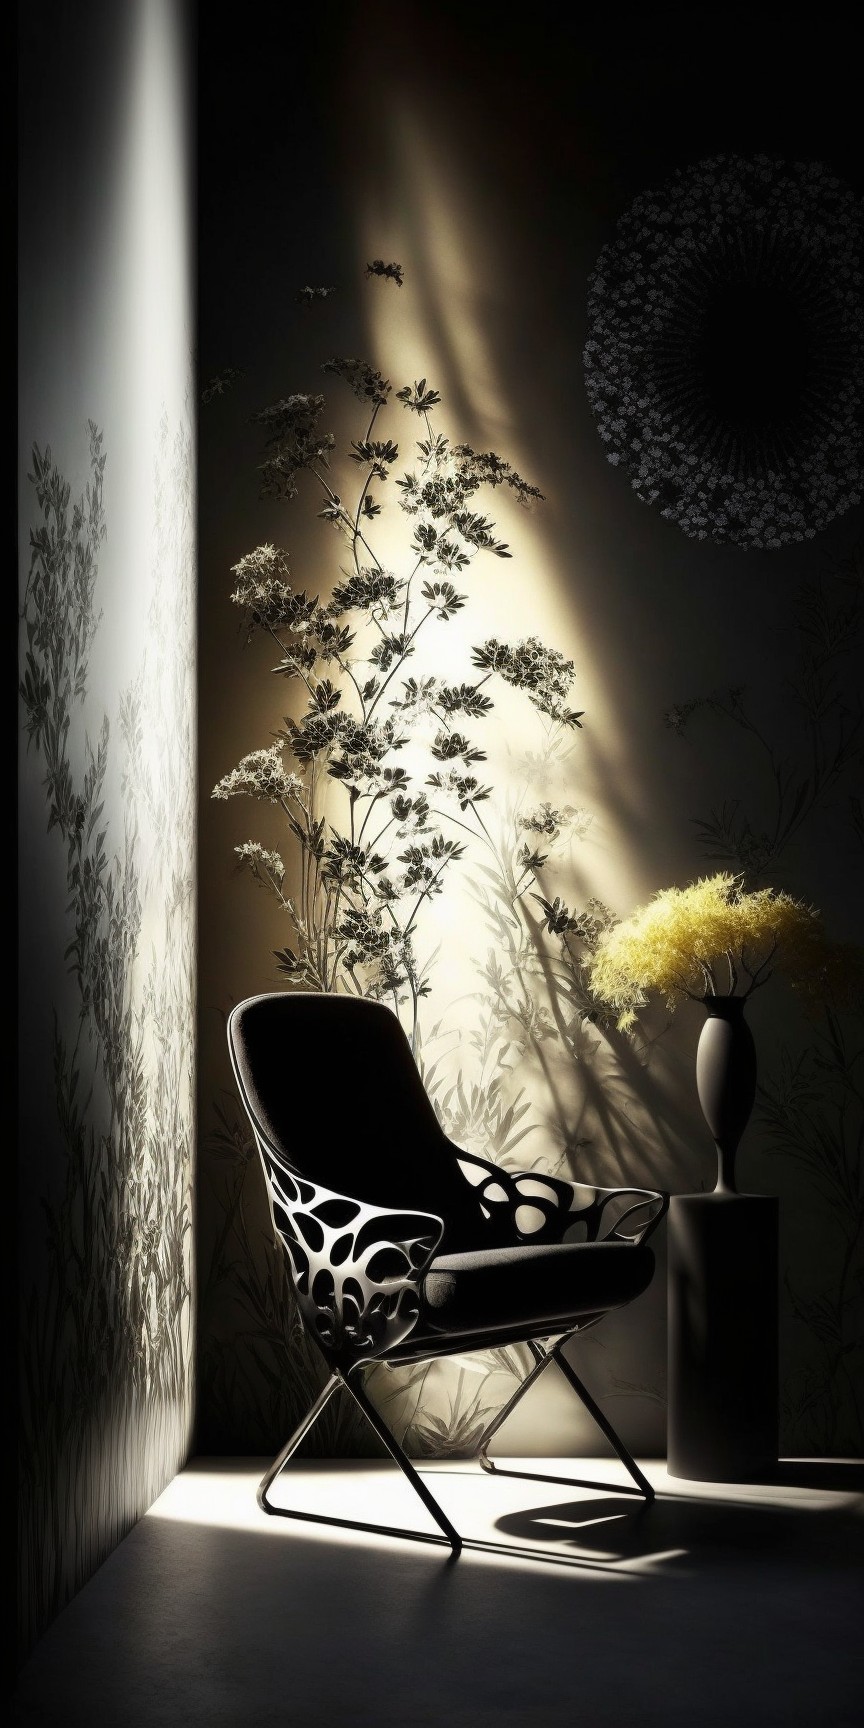 Light and shadow wallpaper in the room